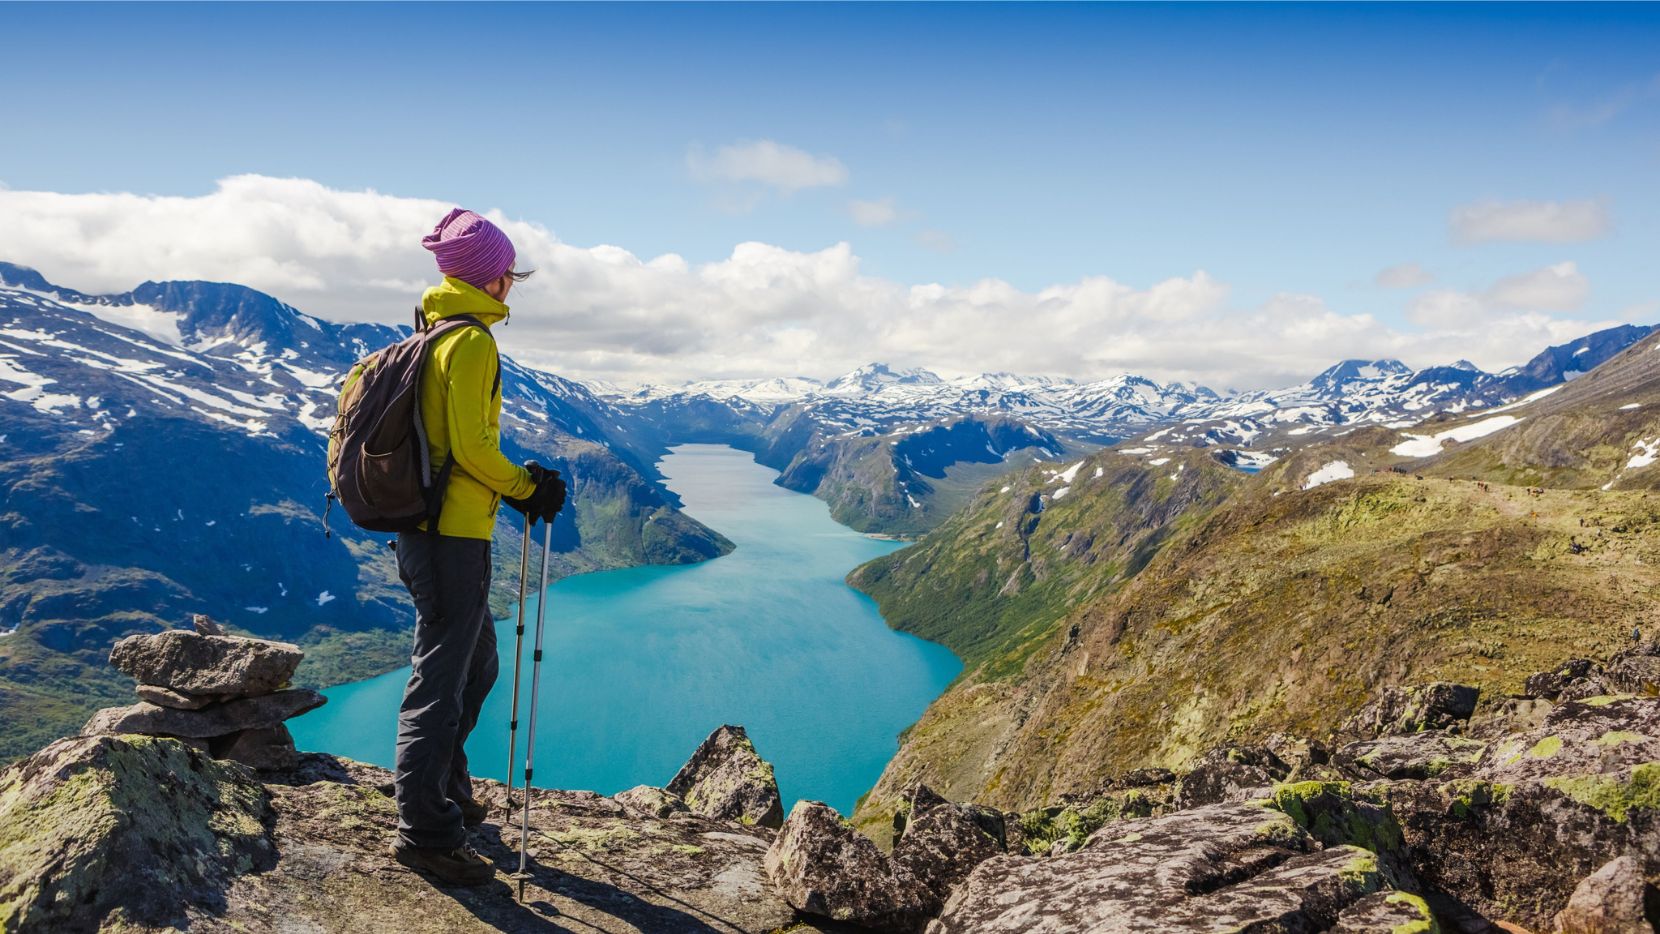 Hiker taking advantage of the 'right to roam' laws in Norway.